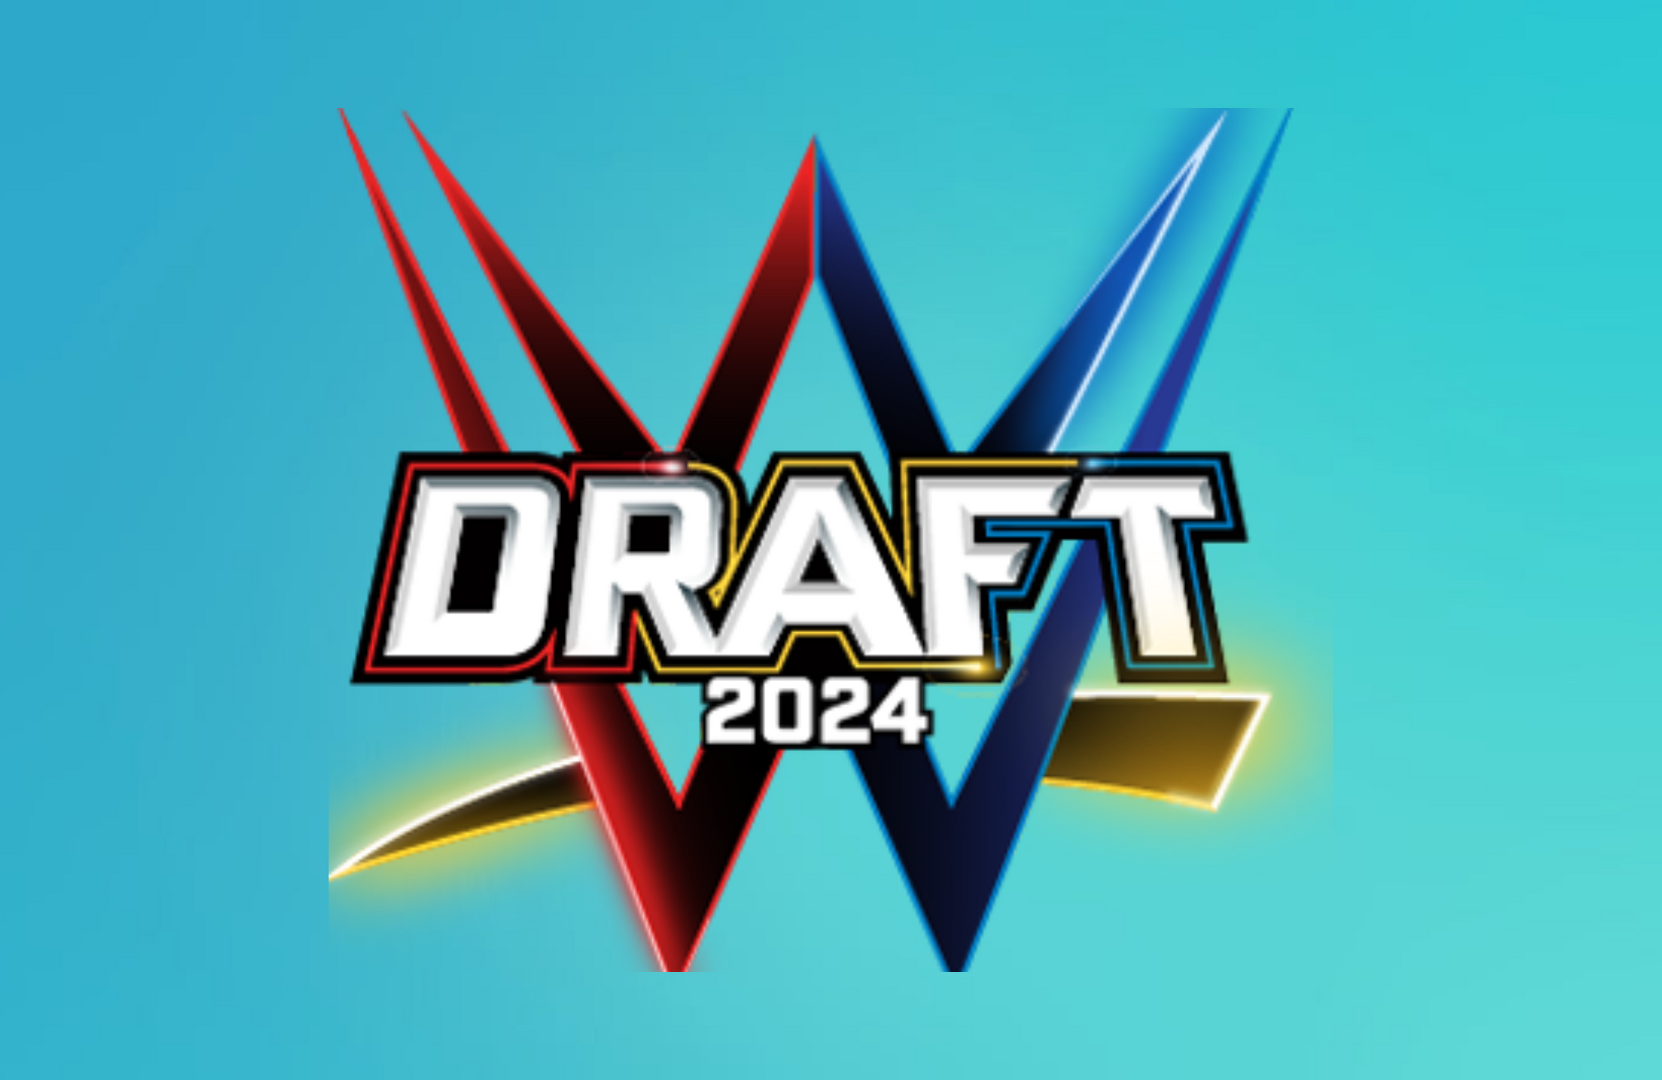 Legends to appear at WWE Draft 2024 on 4/26 SmackDown